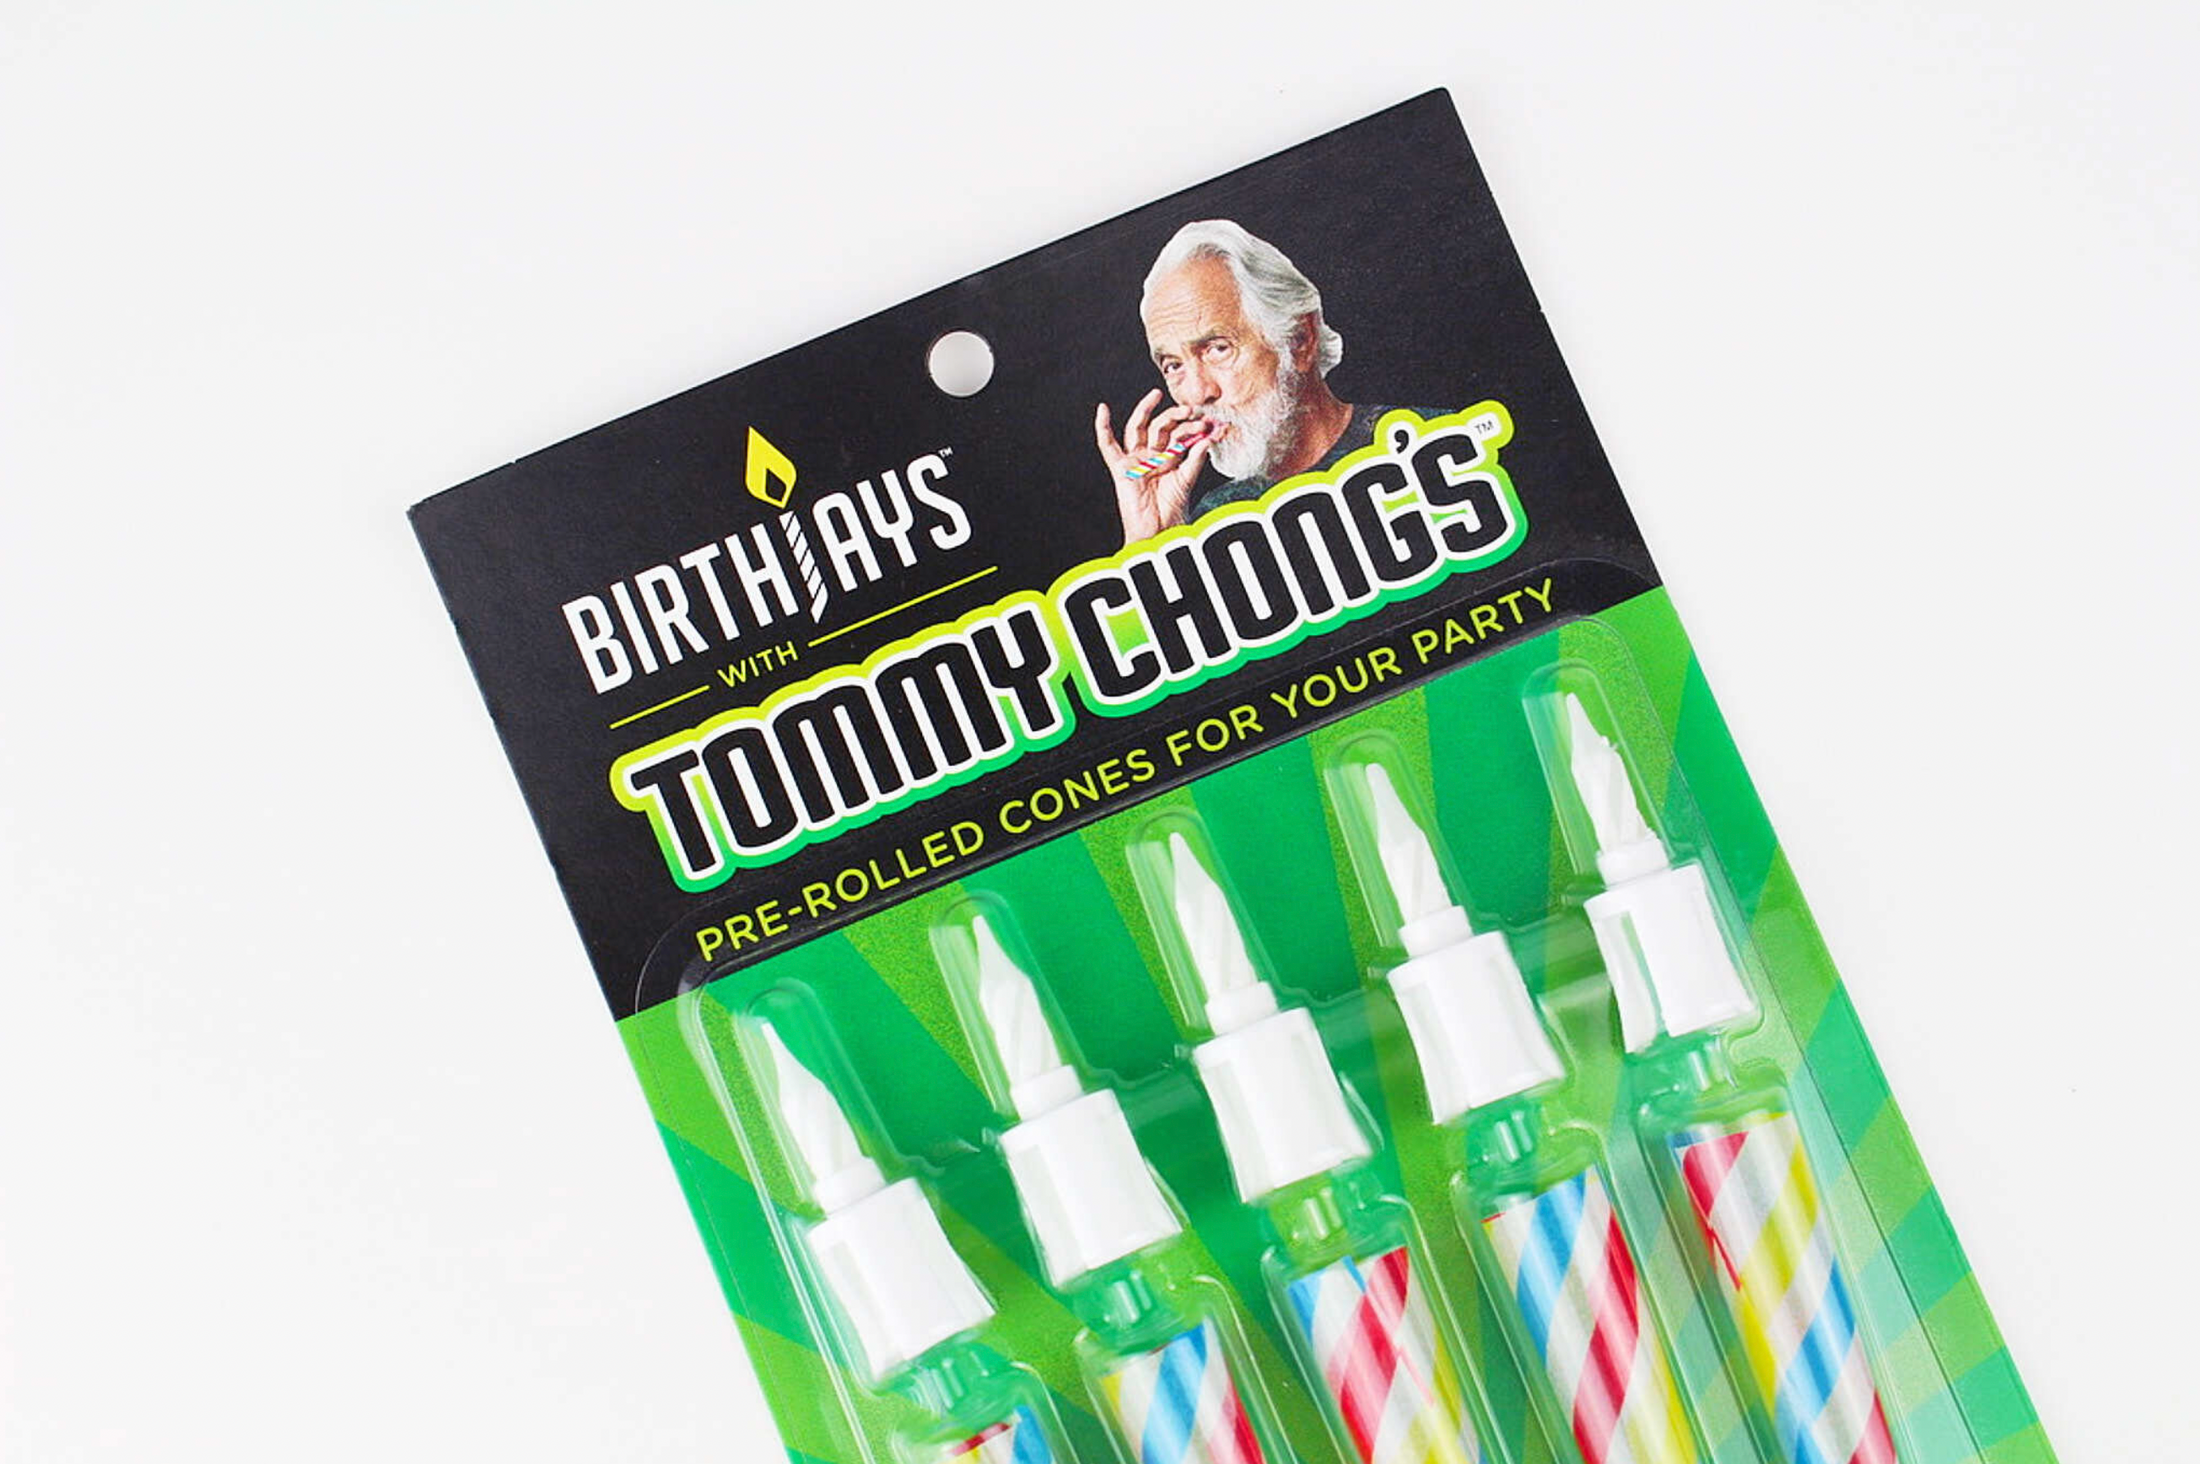 Tommy Chong's BirthJays 5-Pack of Joint Birthday Candles